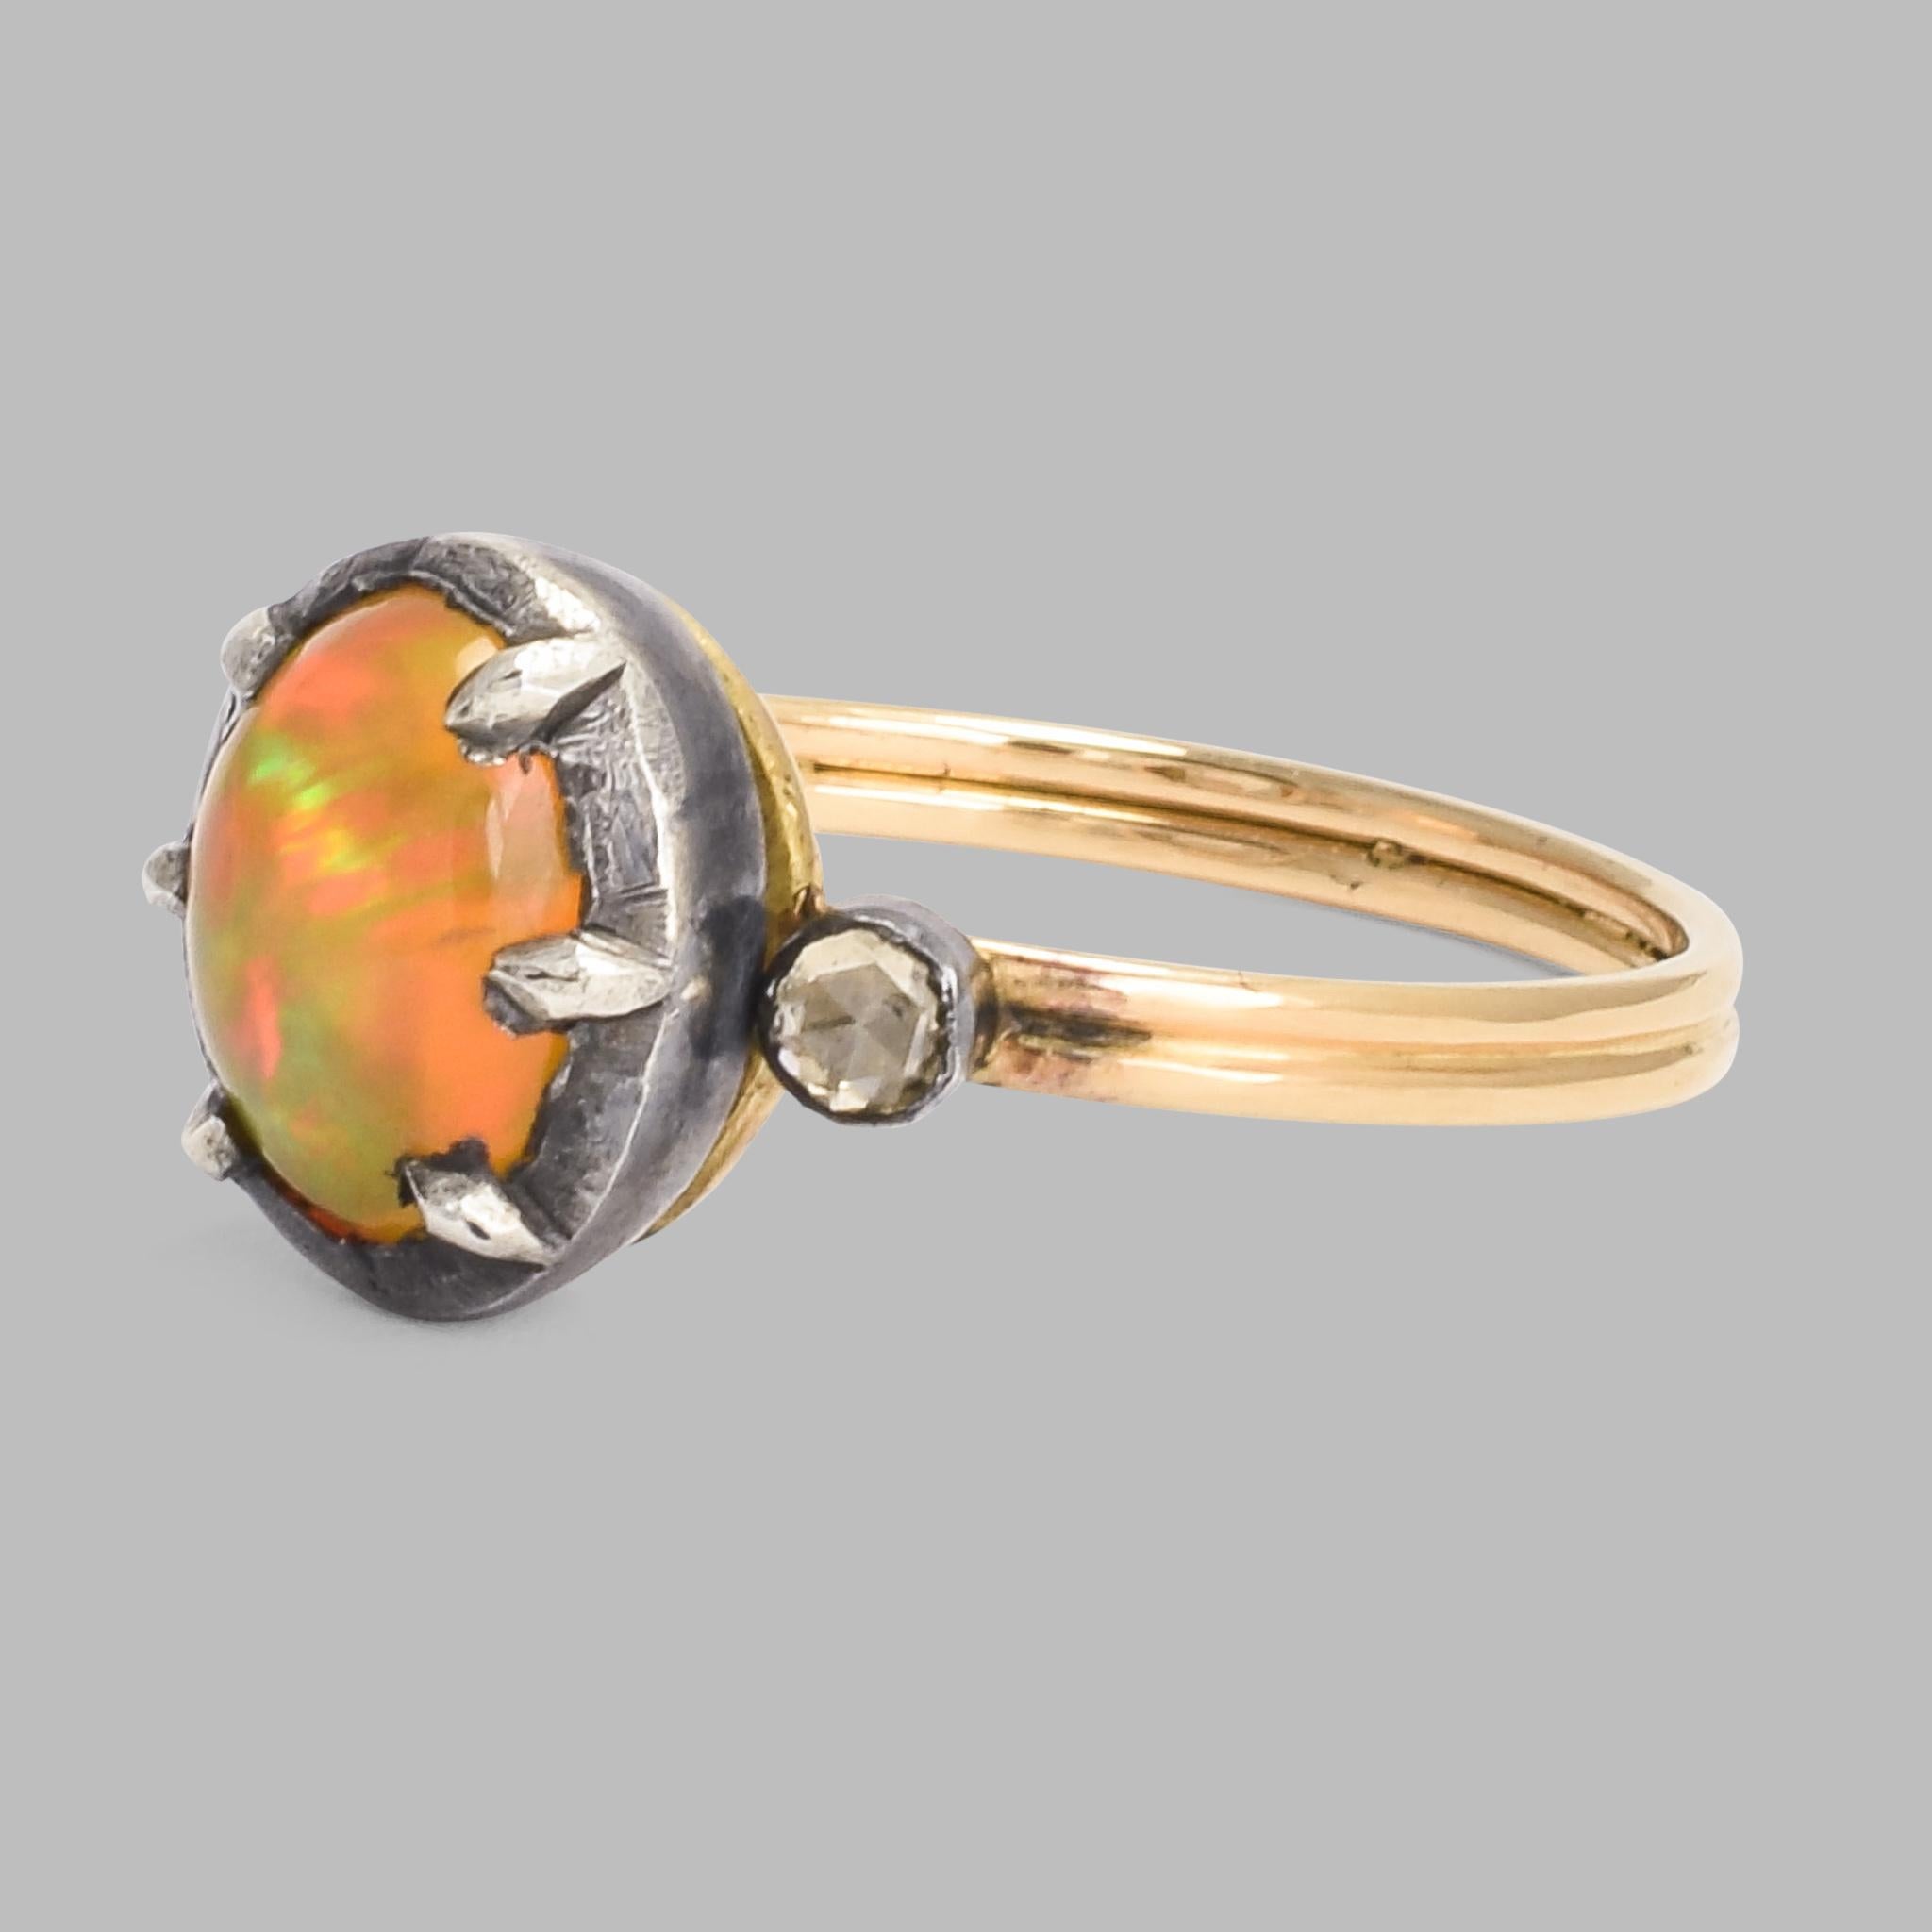 BL Bespoke Collection

Vision and Focus. Capture the energy of the opal for enhanced clarity and mental focus. Let the stone open your eyes to the world around us.

This ring is set with a lively Jelly Opal. The stone has rich orange base tones,